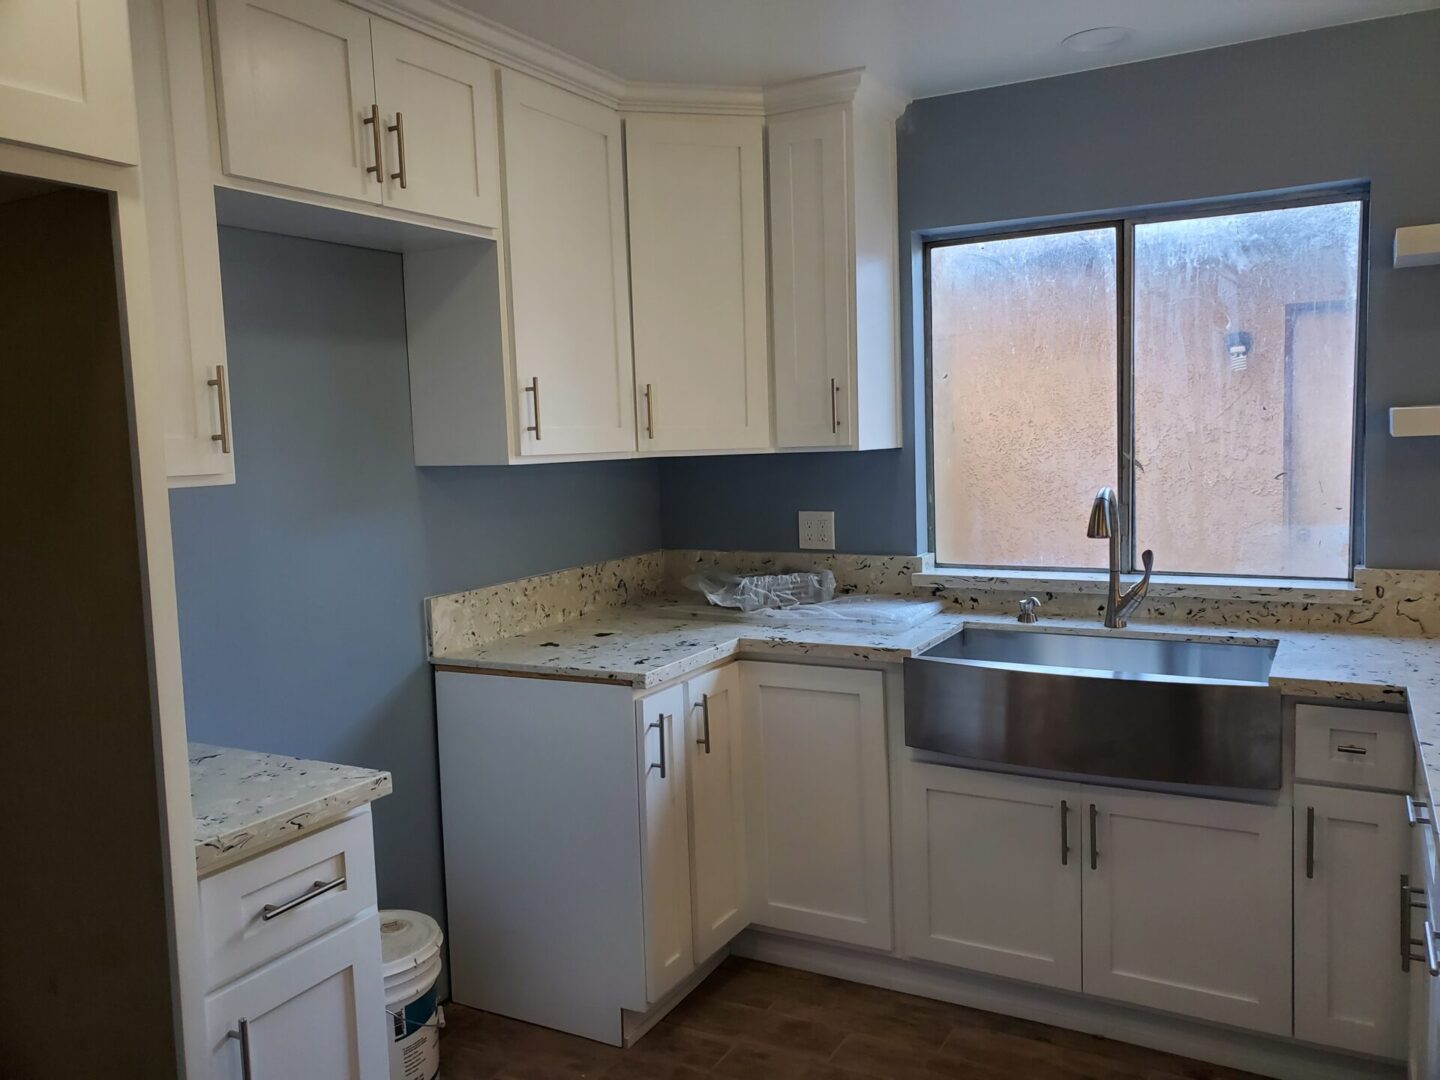 A kitchen with white cabinets and blue walls.